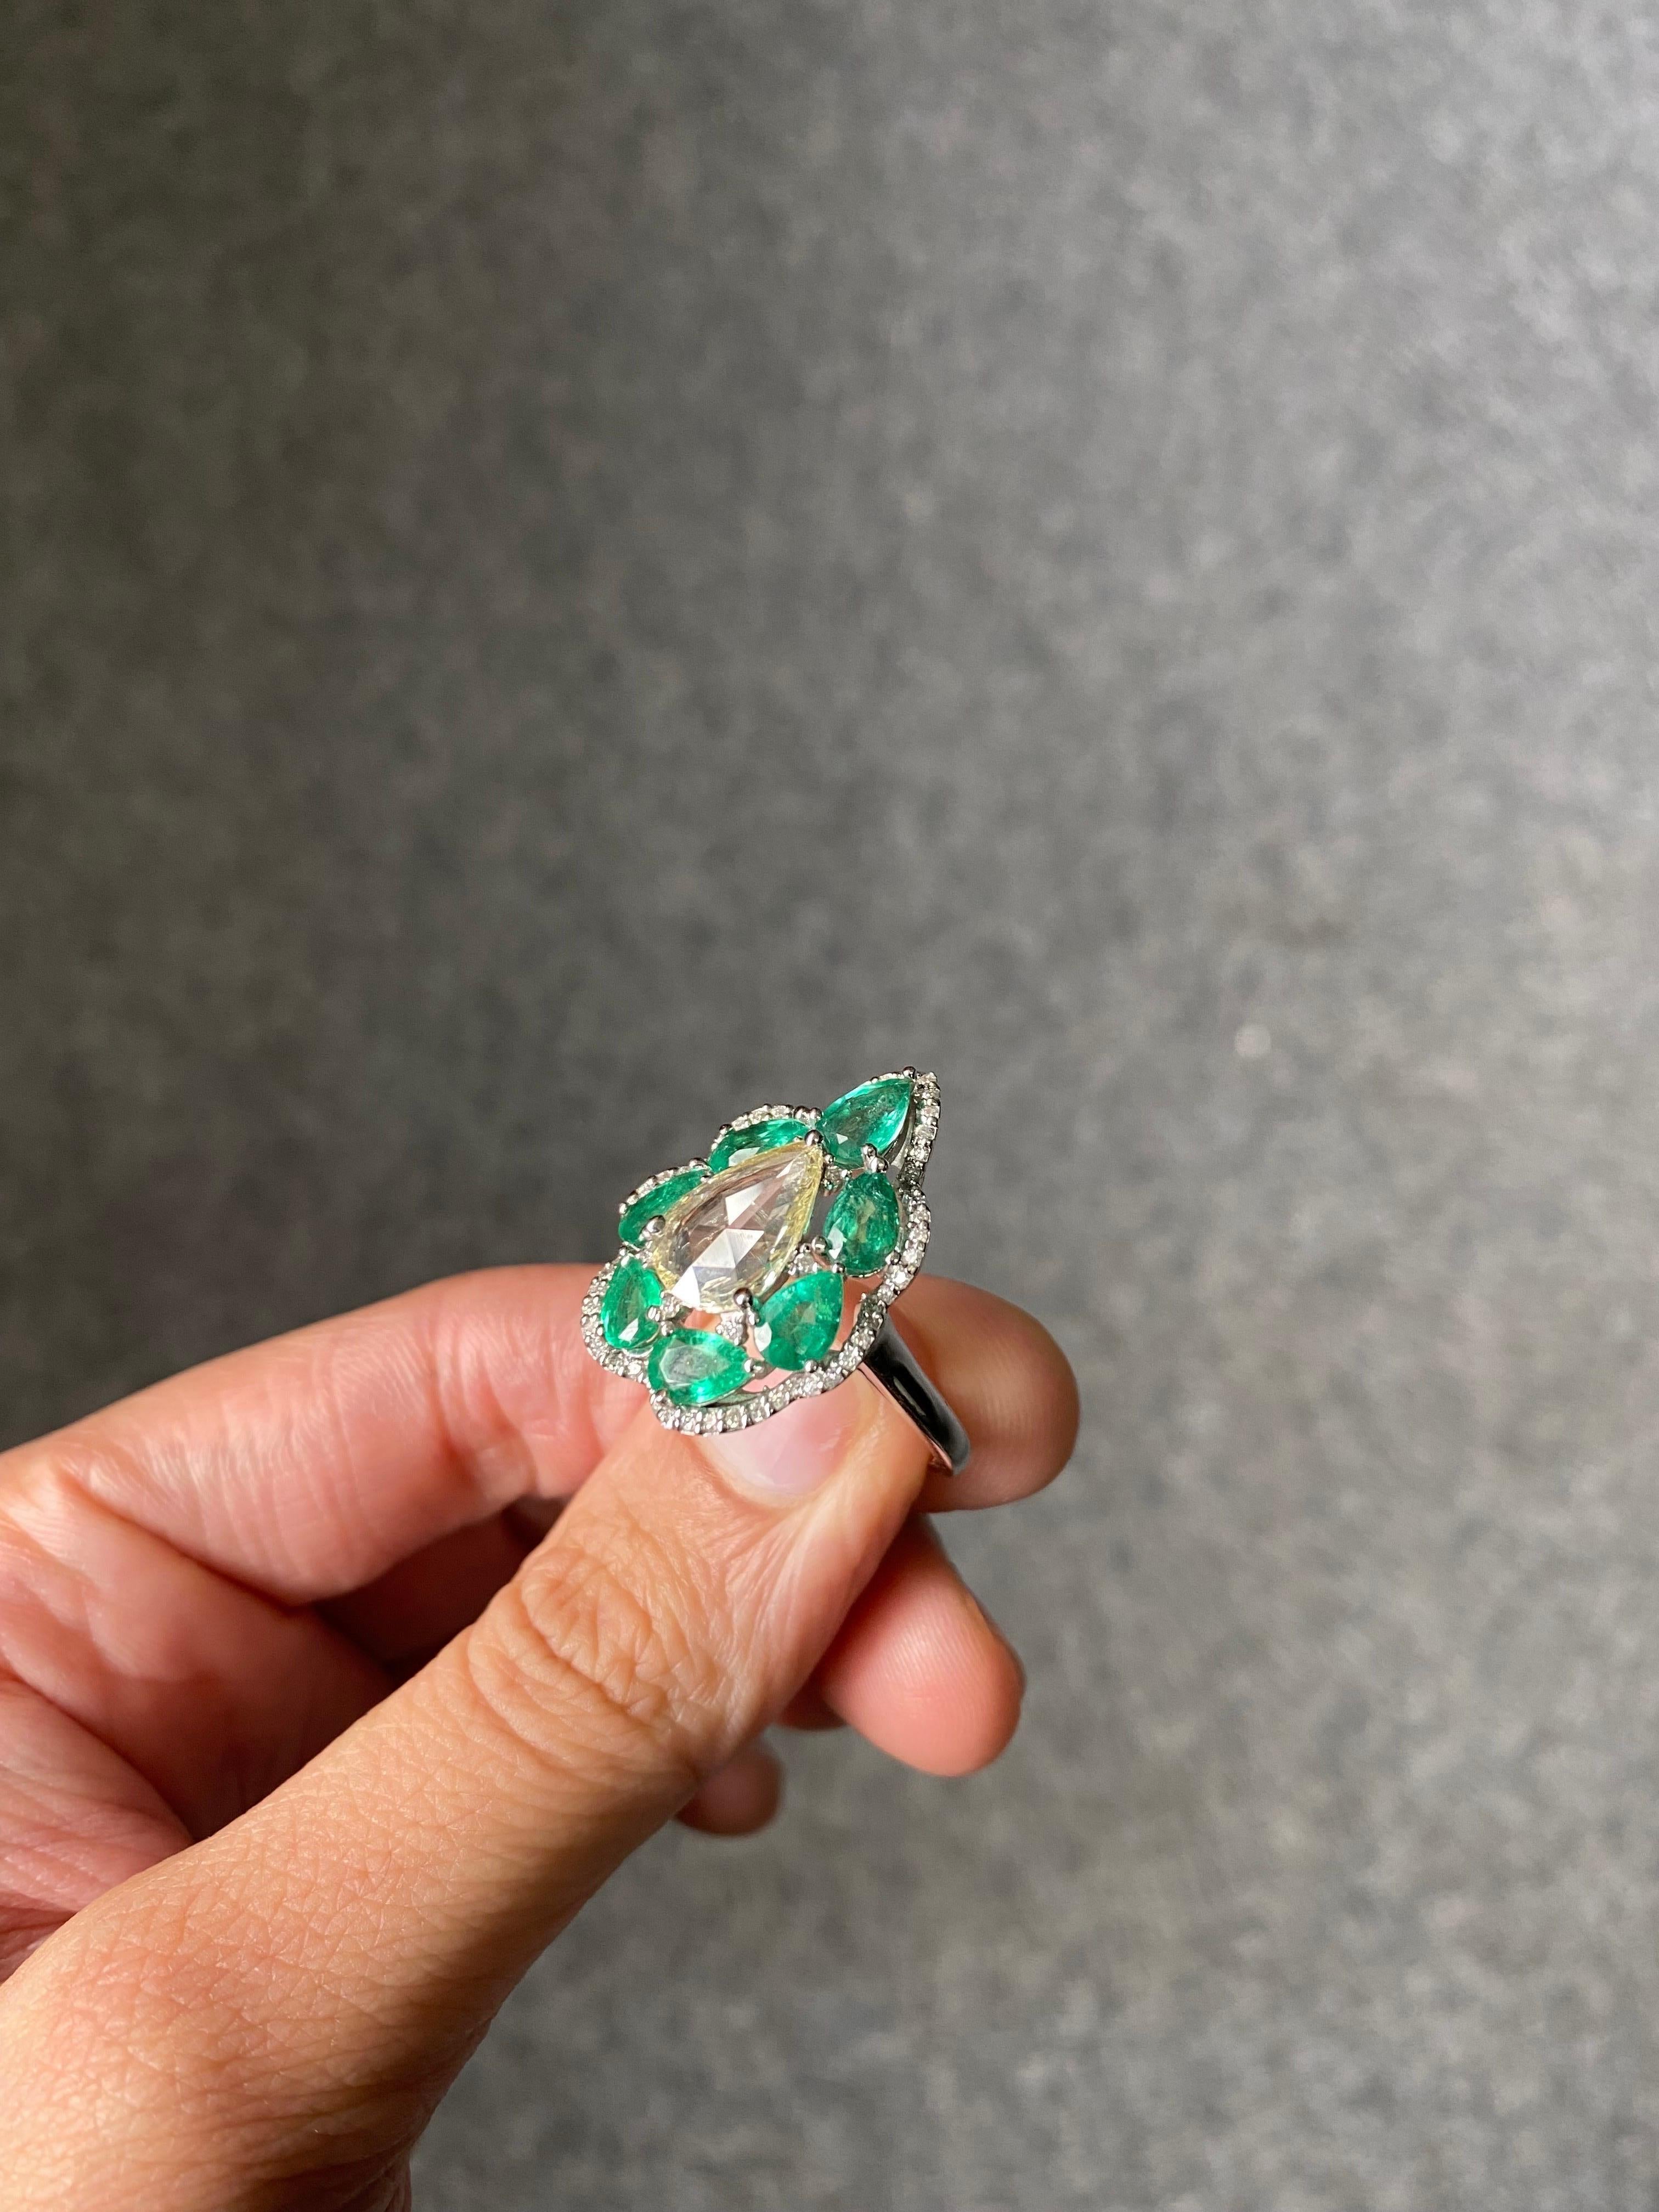 A stunning, art-deco looking, pear shaped 0.86 carat eye clean Rose Cut Diamond centre stone, with 2.66 carat pear shaped Zambian Emerald with great luster and vivid green color. The gemstones are set in solid 18K White Gold. The ring is currently